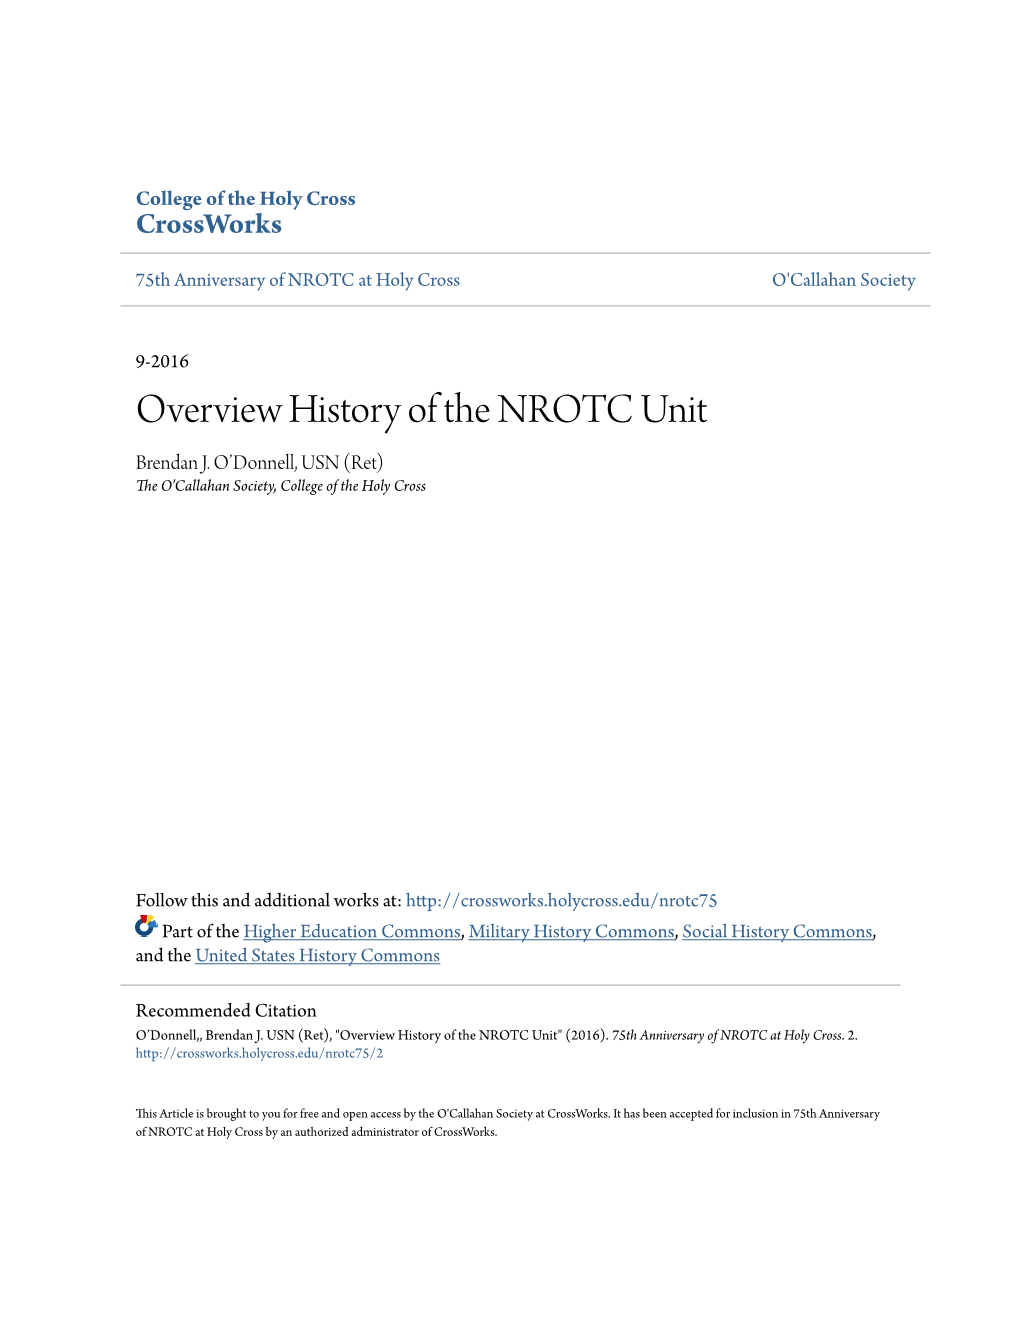 Overview History of the NROTC Unit Brendan J